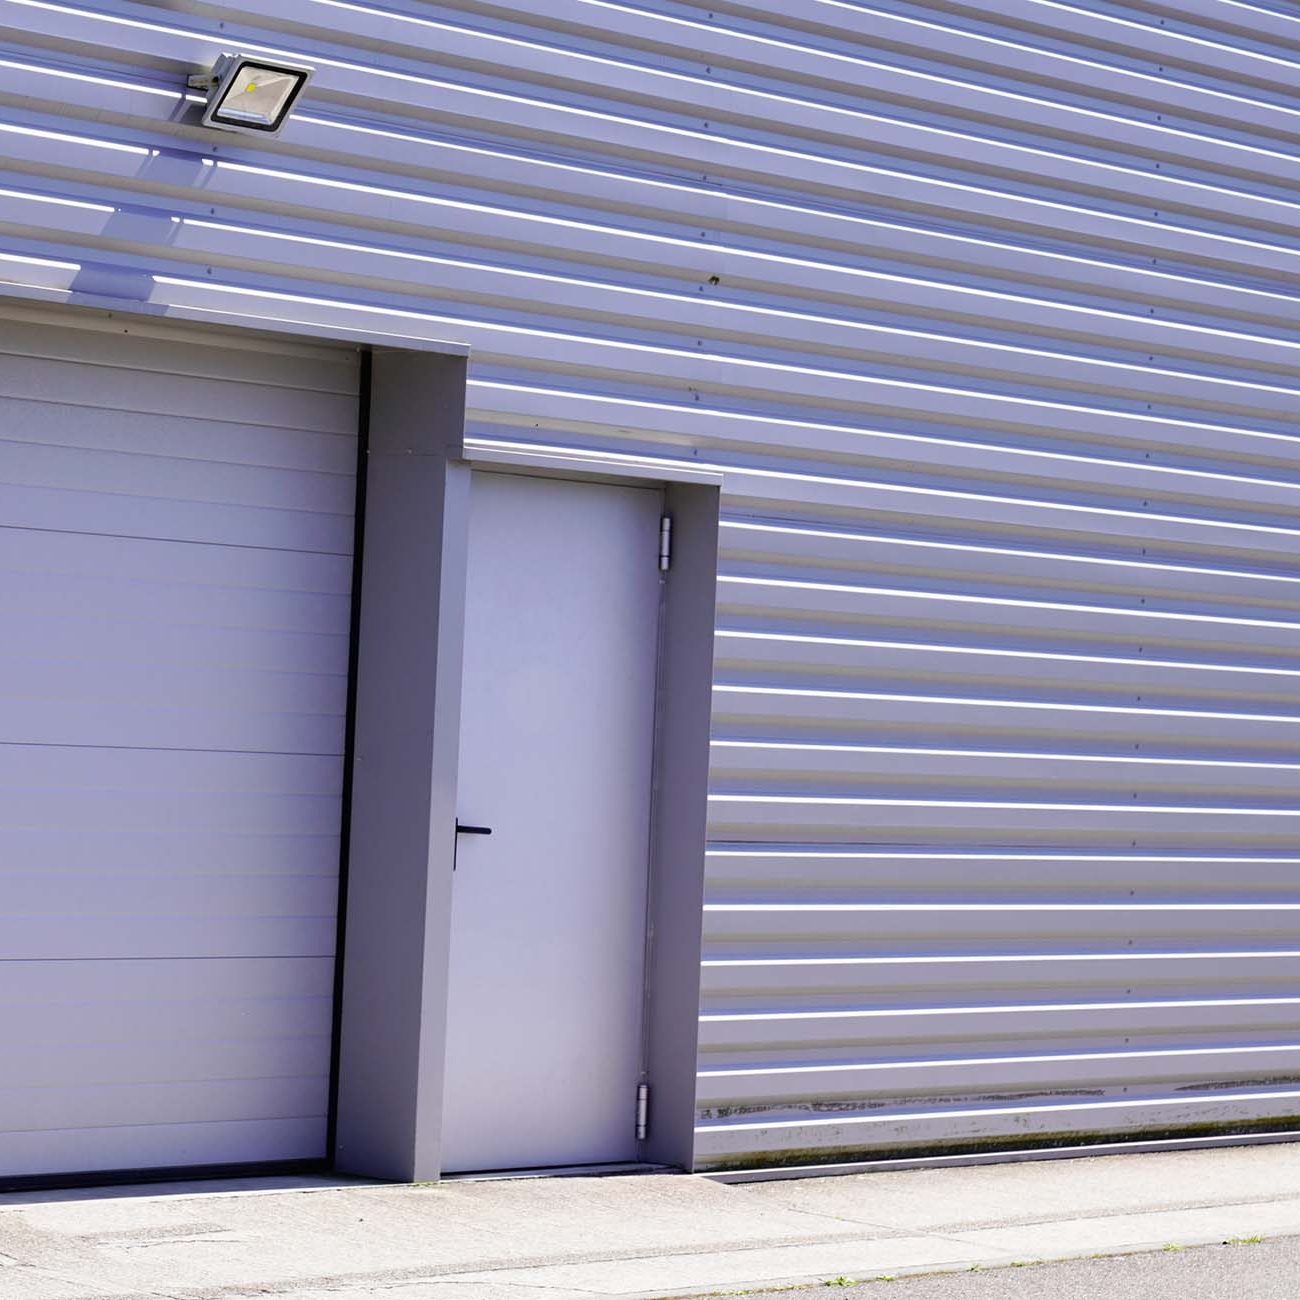 Storage units with white roller shutter doors in industrial area